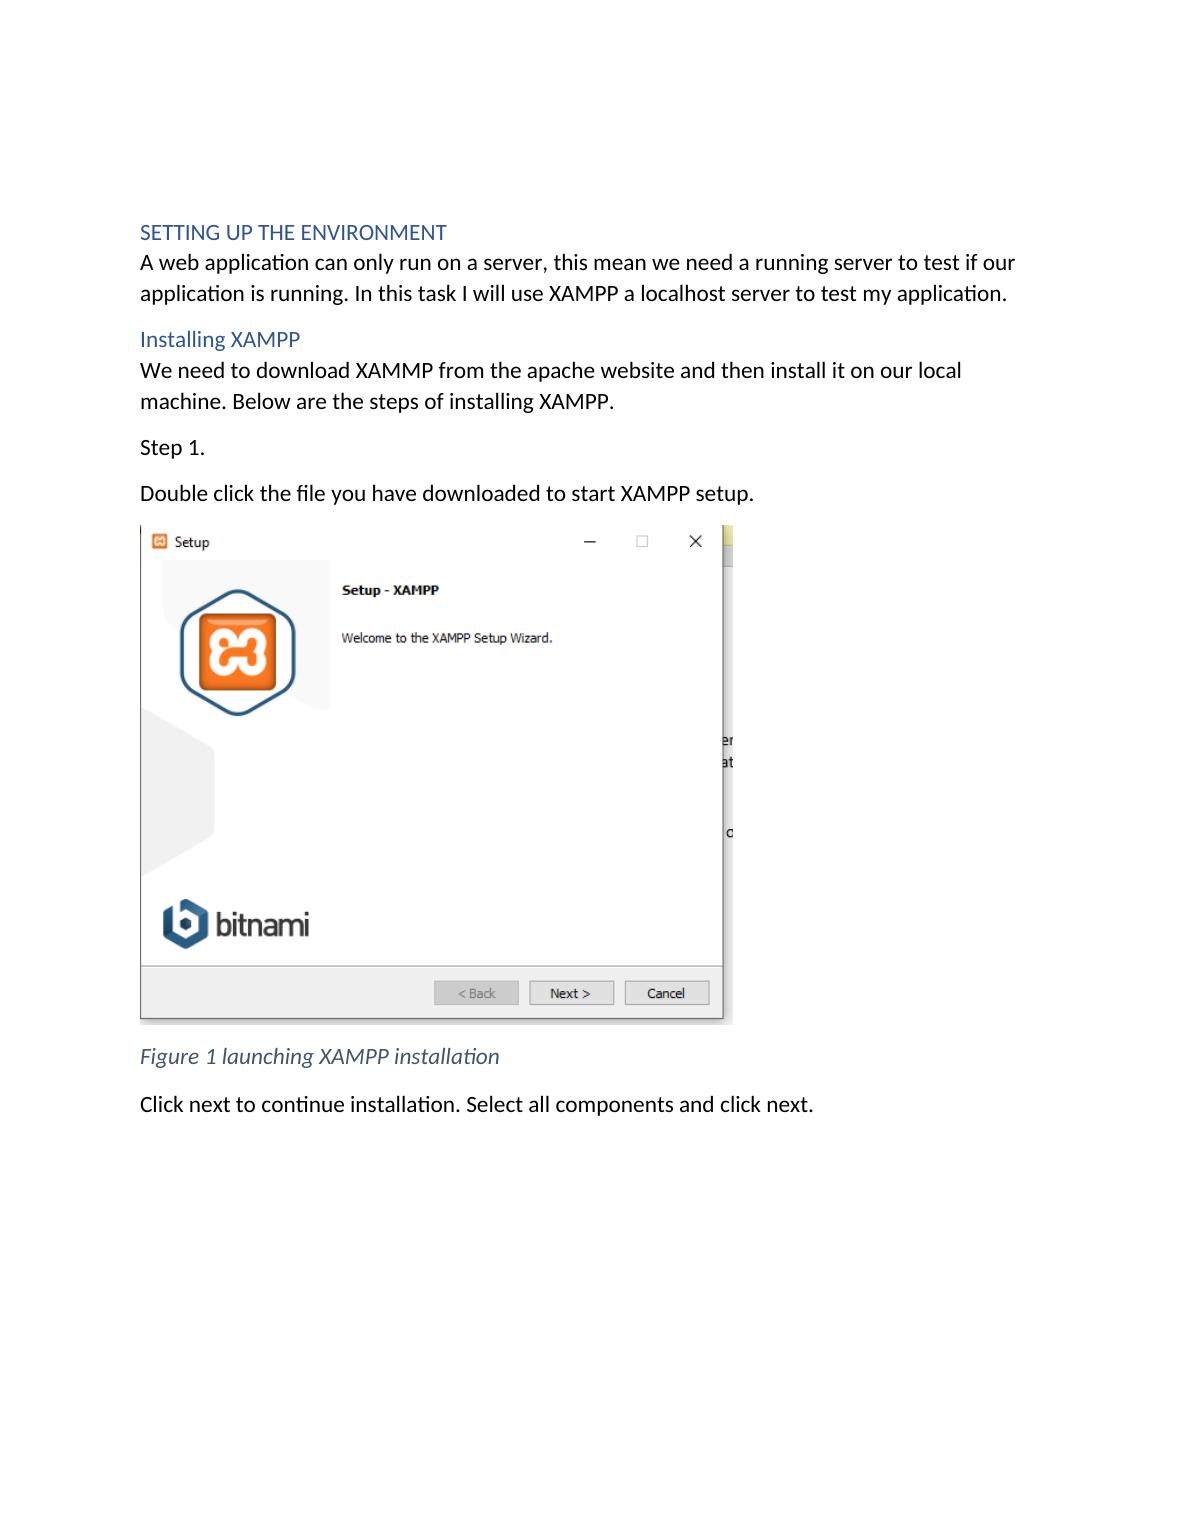 How to Instal XAMPP - Assignment_3